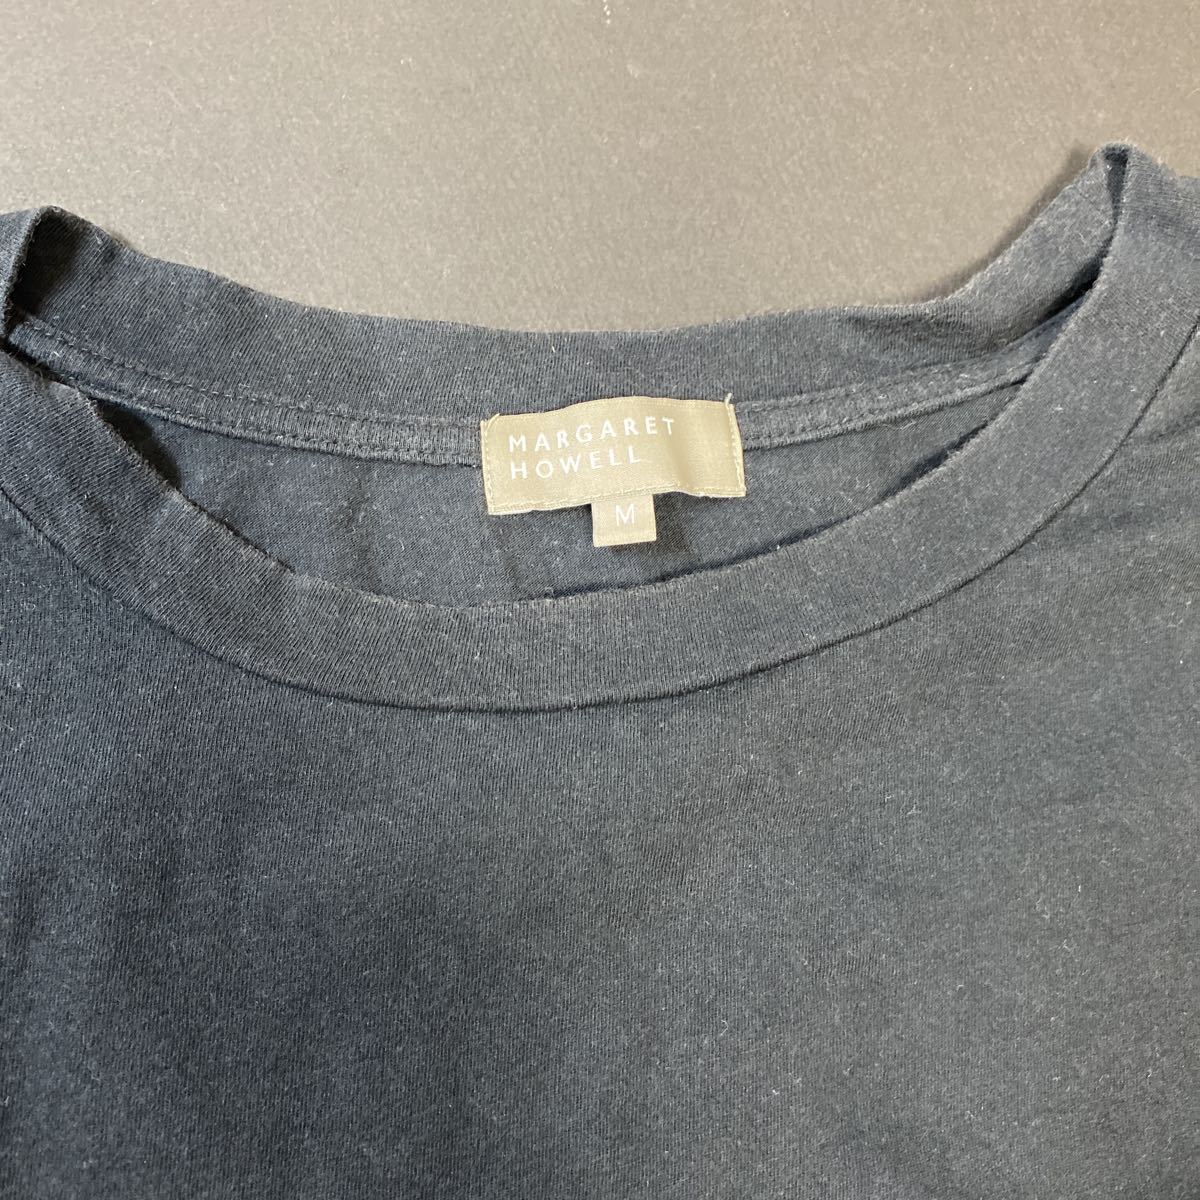  regular goods MARGARET HOWELL Margaret Howell short sleeves sleeve linen switch T-shirt cut and sewn black black M size cotton flax made in Japan men's 